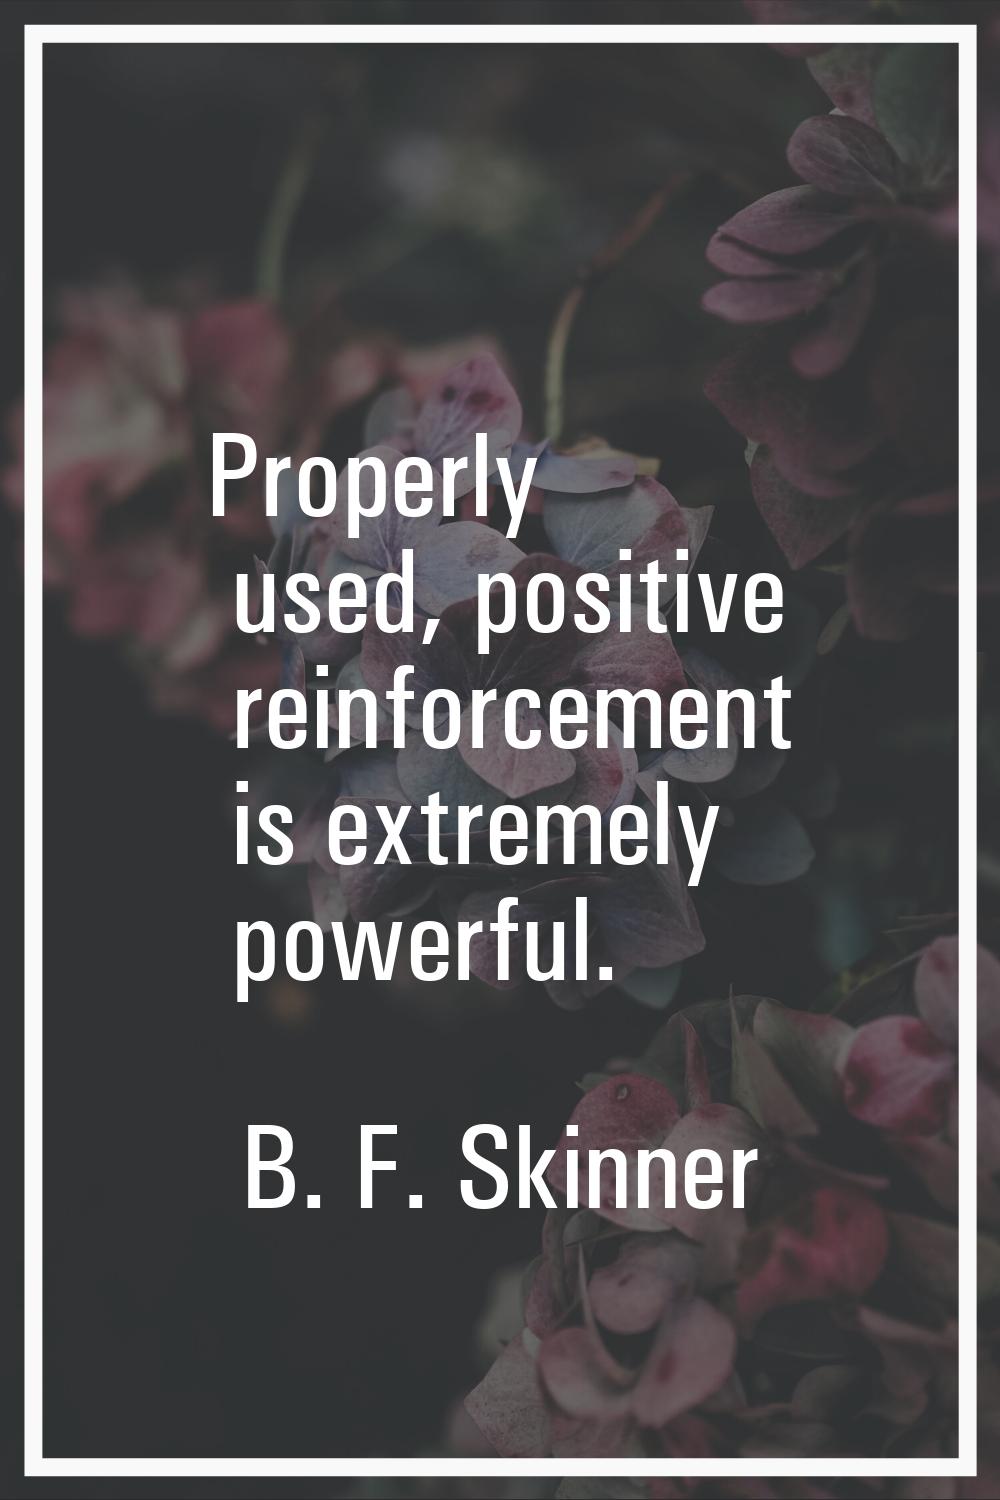 Properly used, positive reinforcement is extremely powerful.